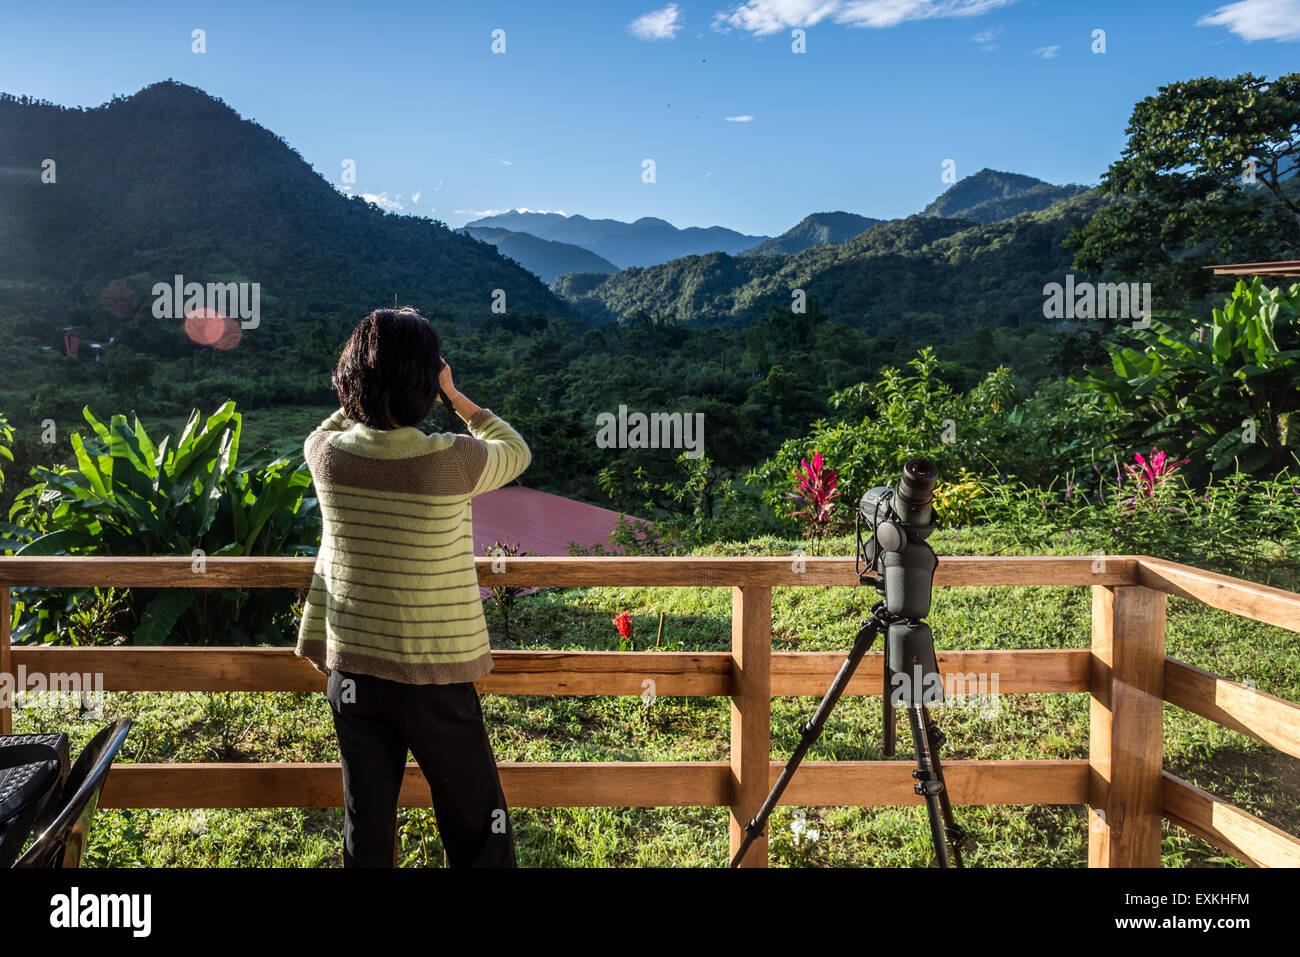 A female bird watcher looks out the lush green forest from a patio. Mindo, Ecuador. Stock Photo